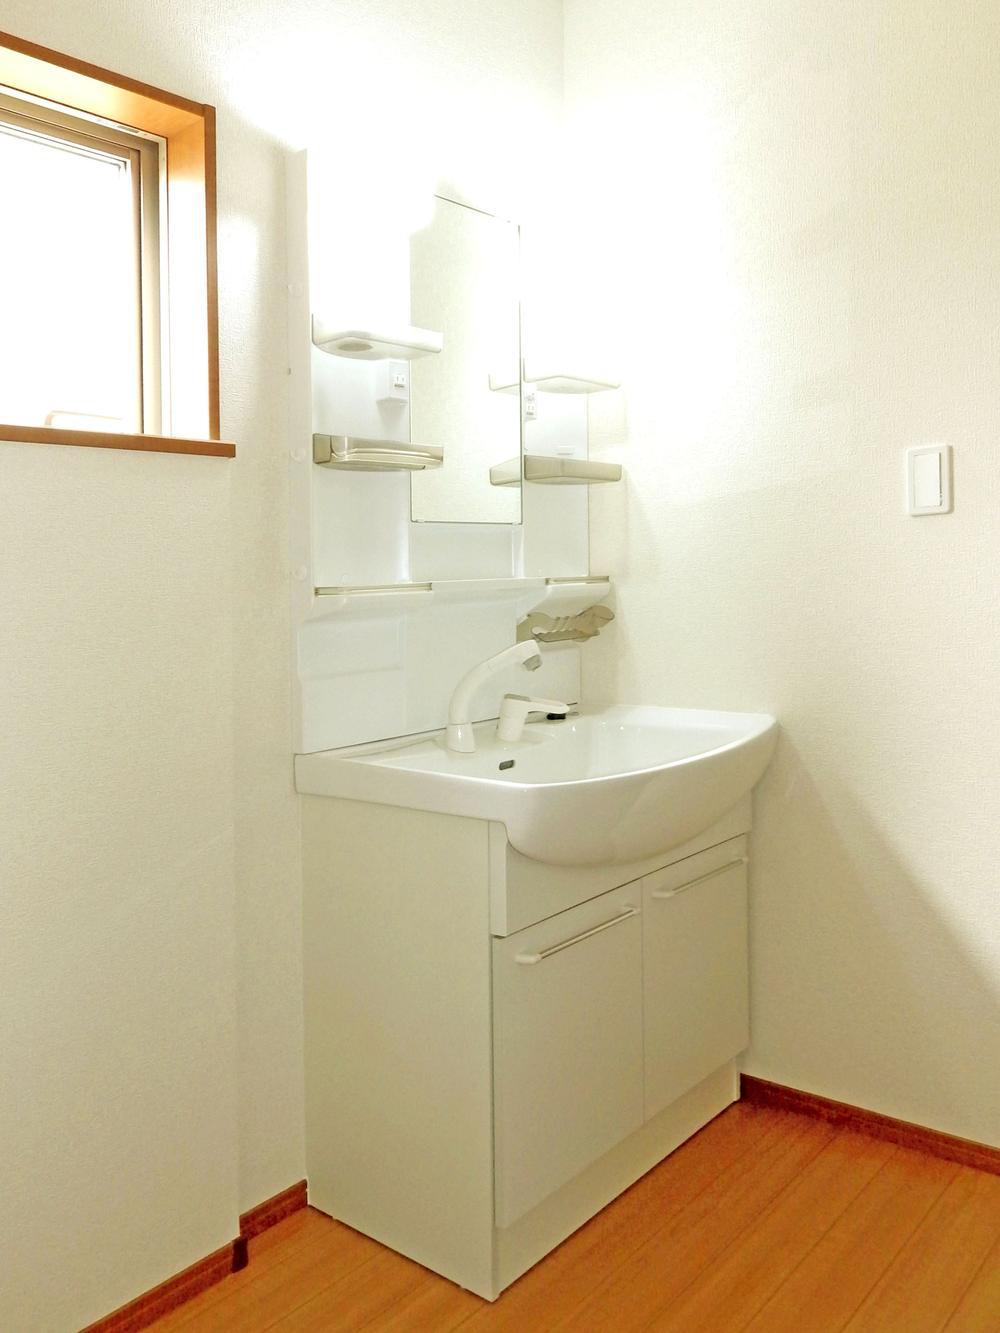 Wash basin, toilet. It is the washstand of the same specification.